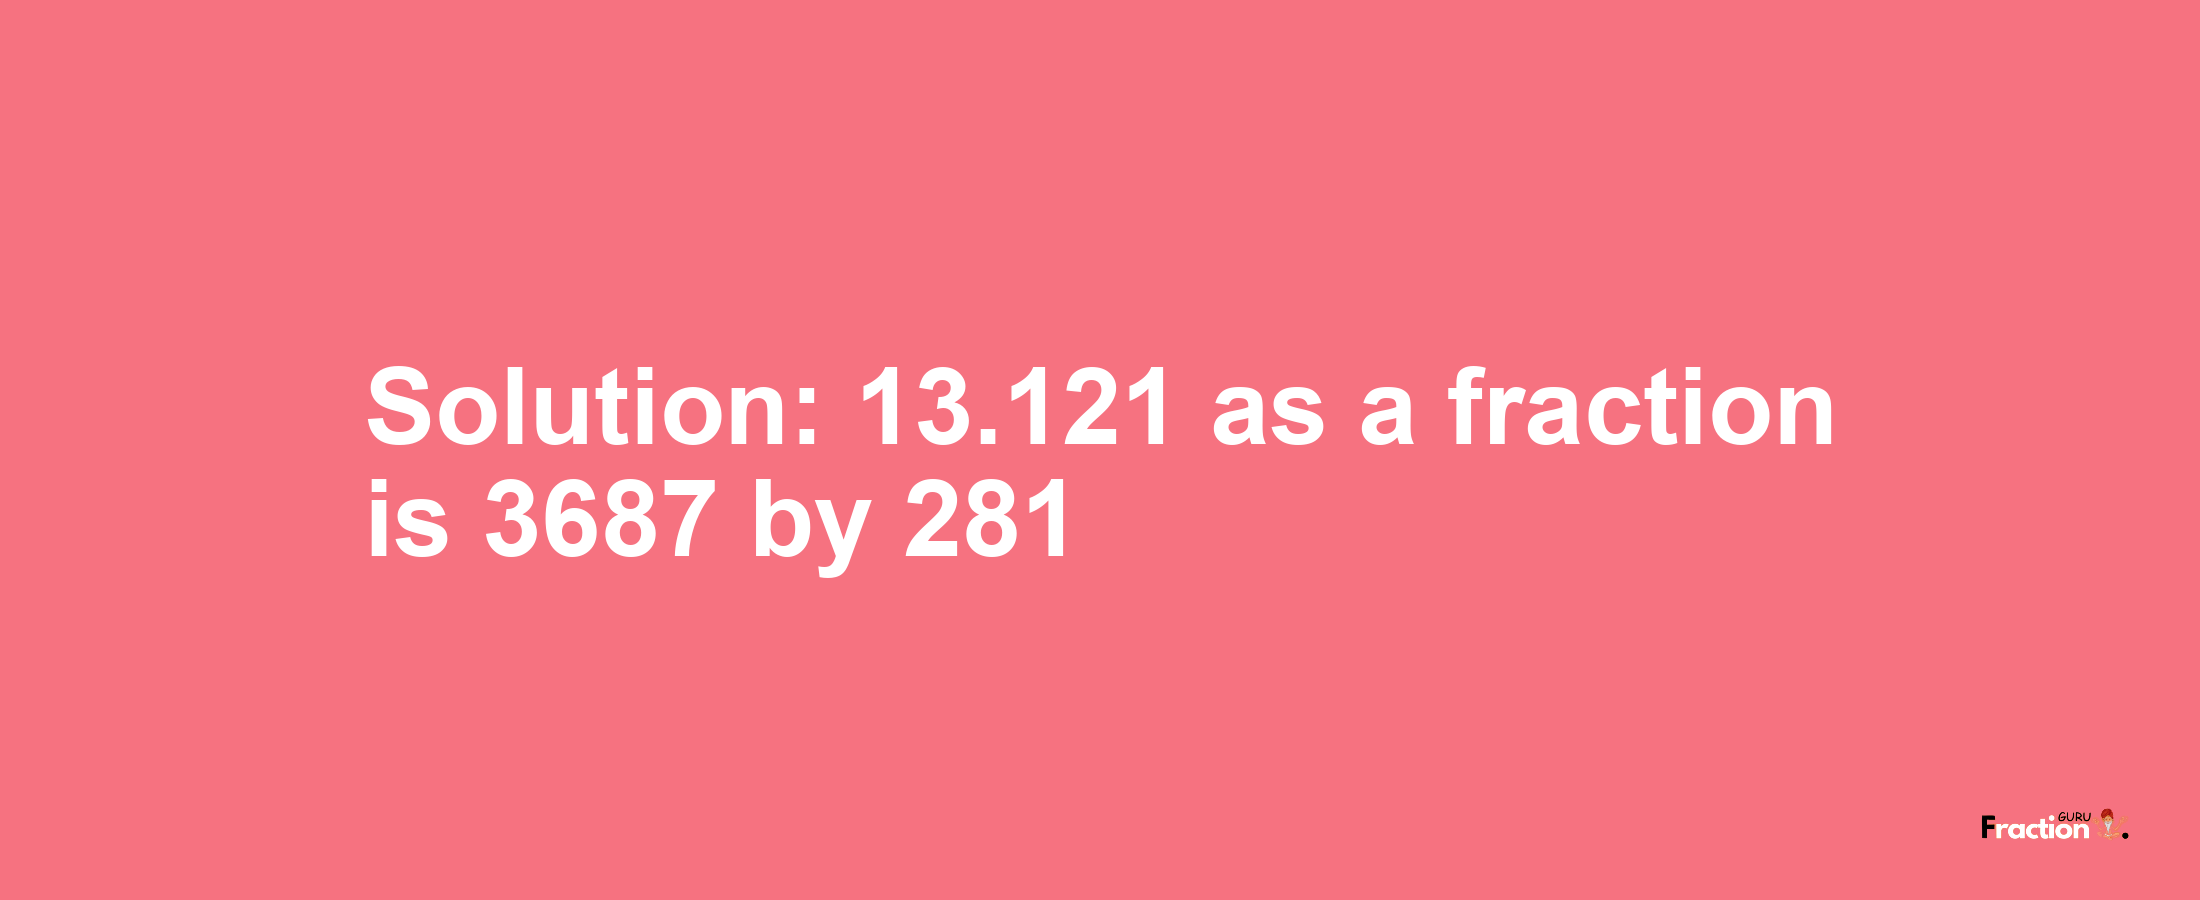 Solution:13.121 as a fraction is 3687/281